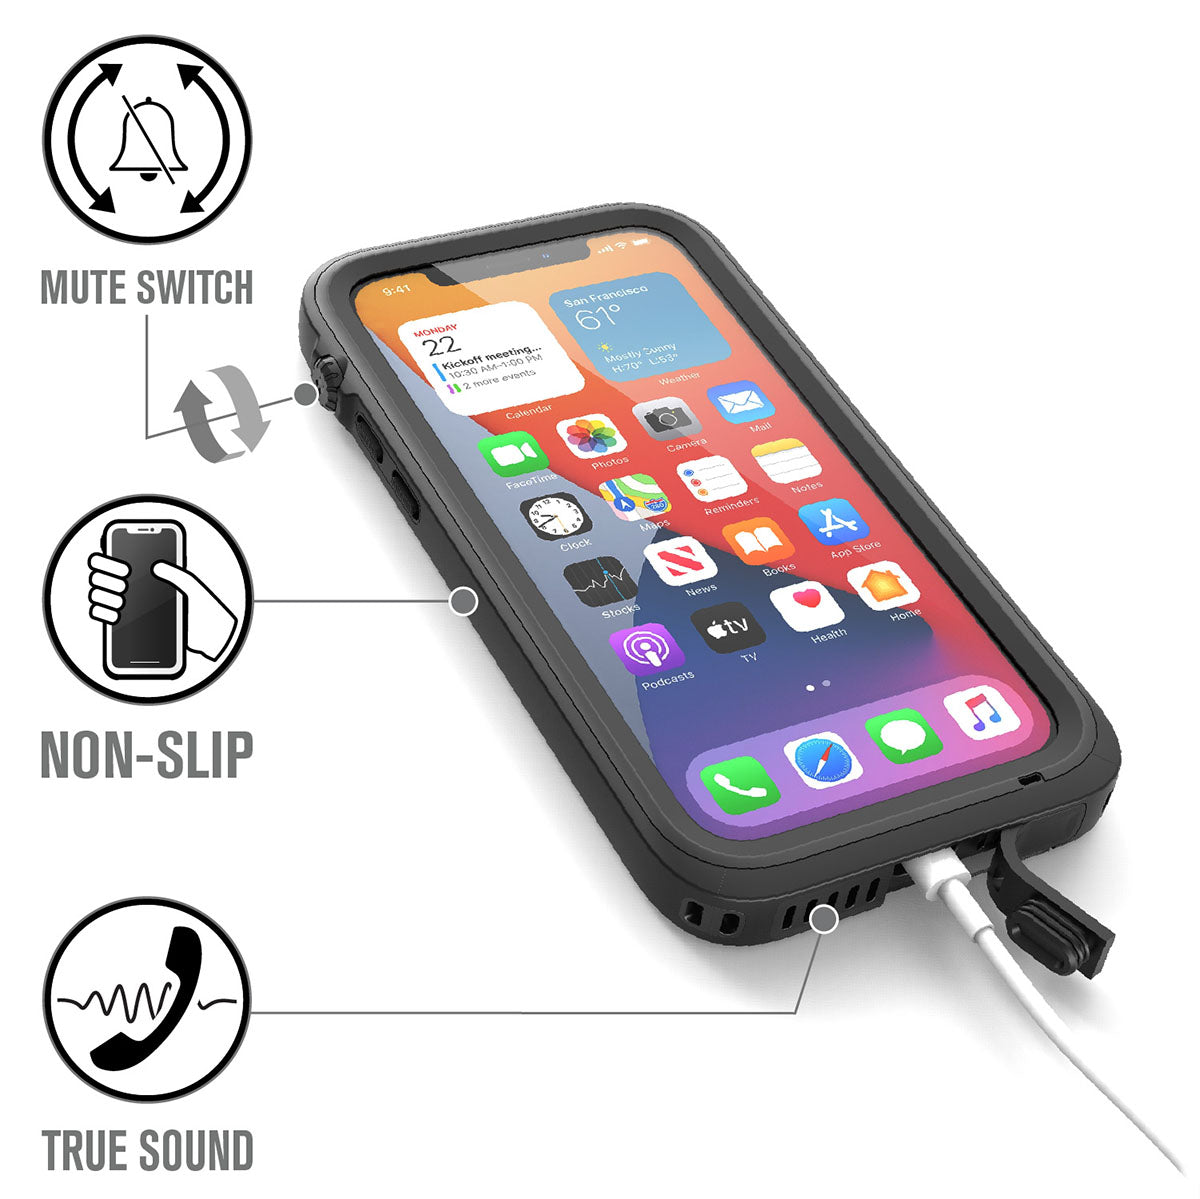 Catalyst iPhone 12 waterproof case total protection showing features of the case Text reads mute switch non-slip true sound.